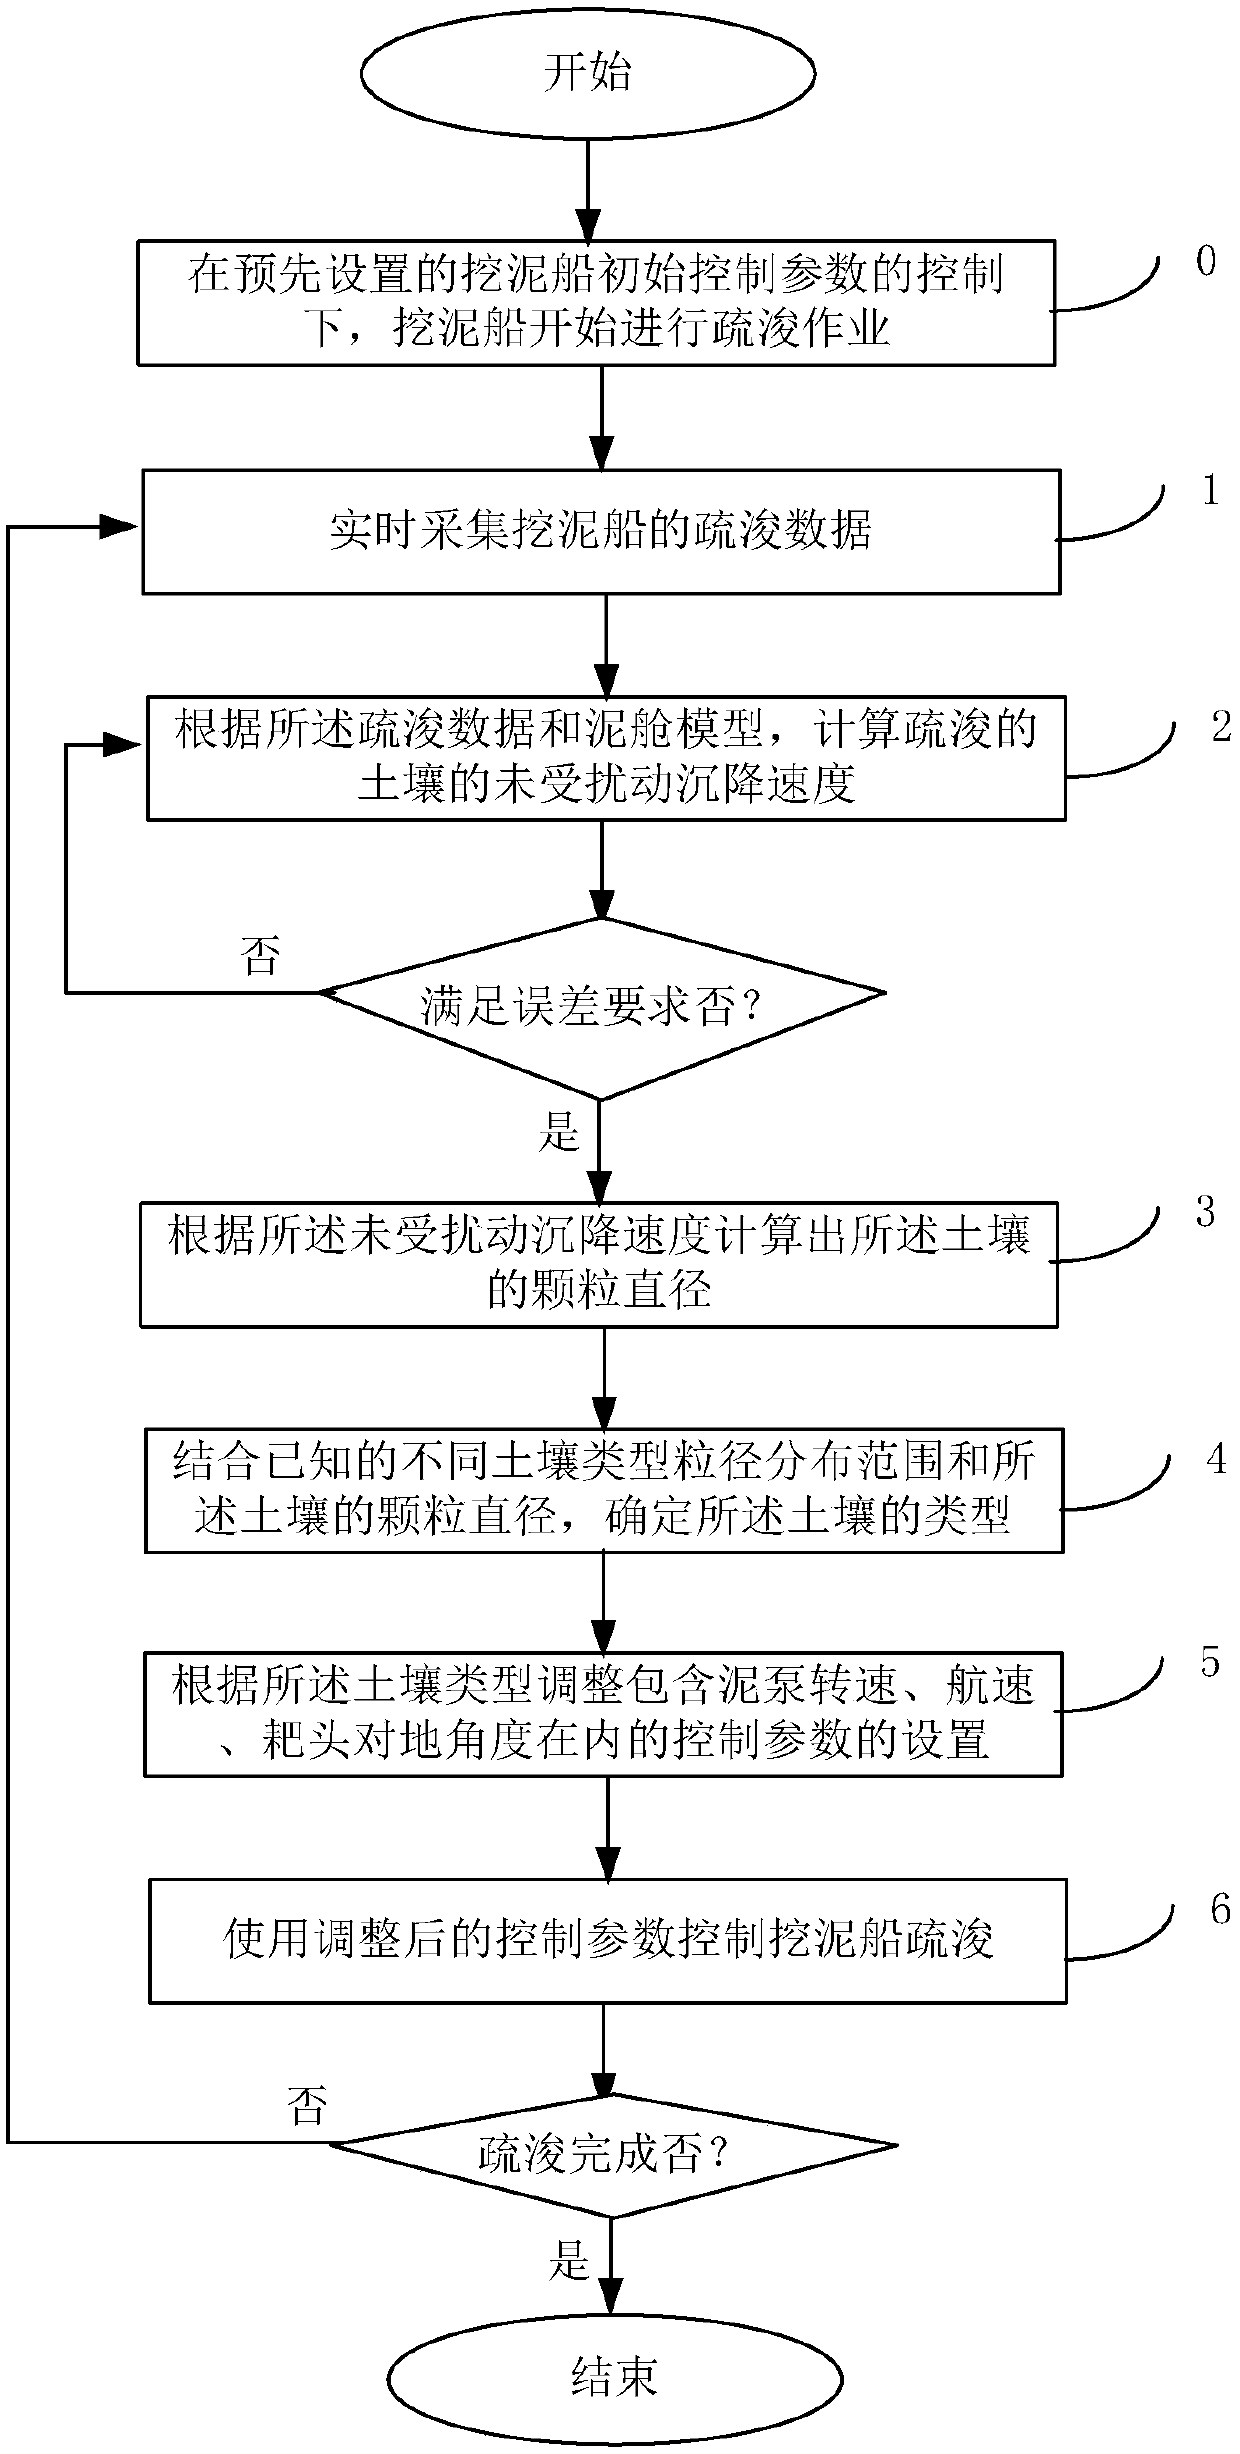 Soil type analysis method and control method for dredging by dredger